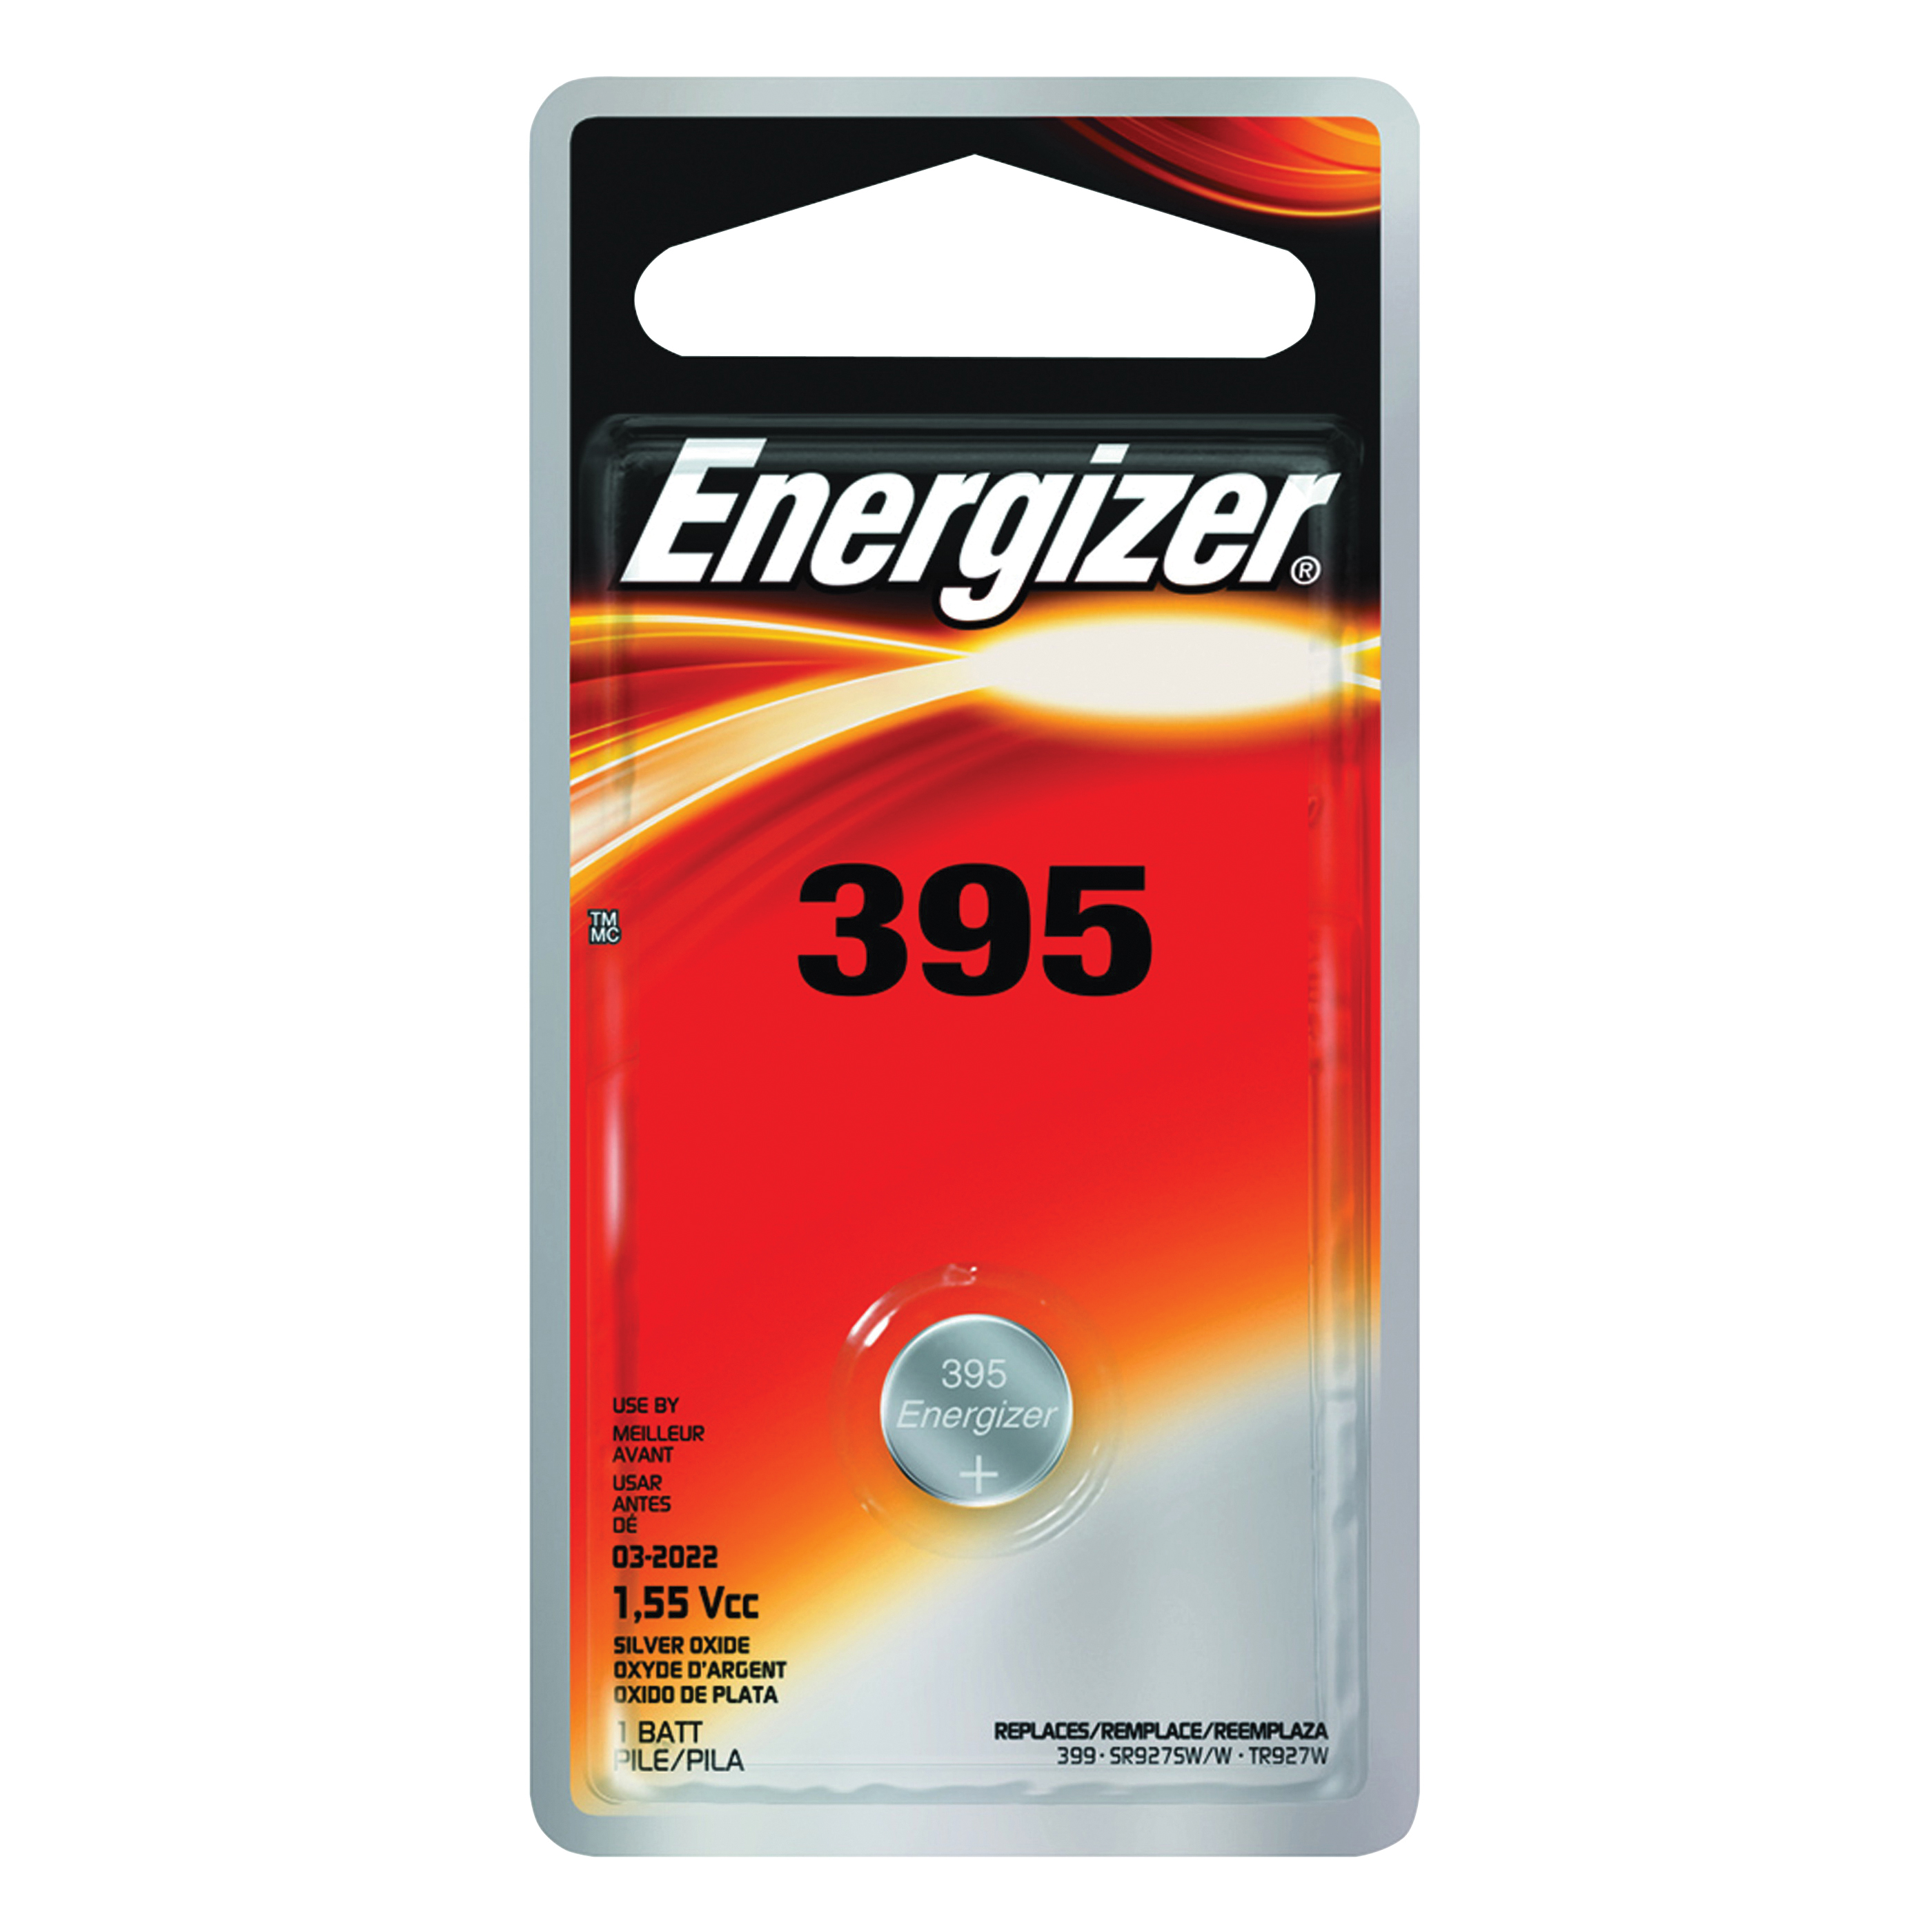 Energizer 395BPZ Coin Cell Battery, 1.5 V Battery, 51 mAh, 395 Battery, Silver Oxide - 1